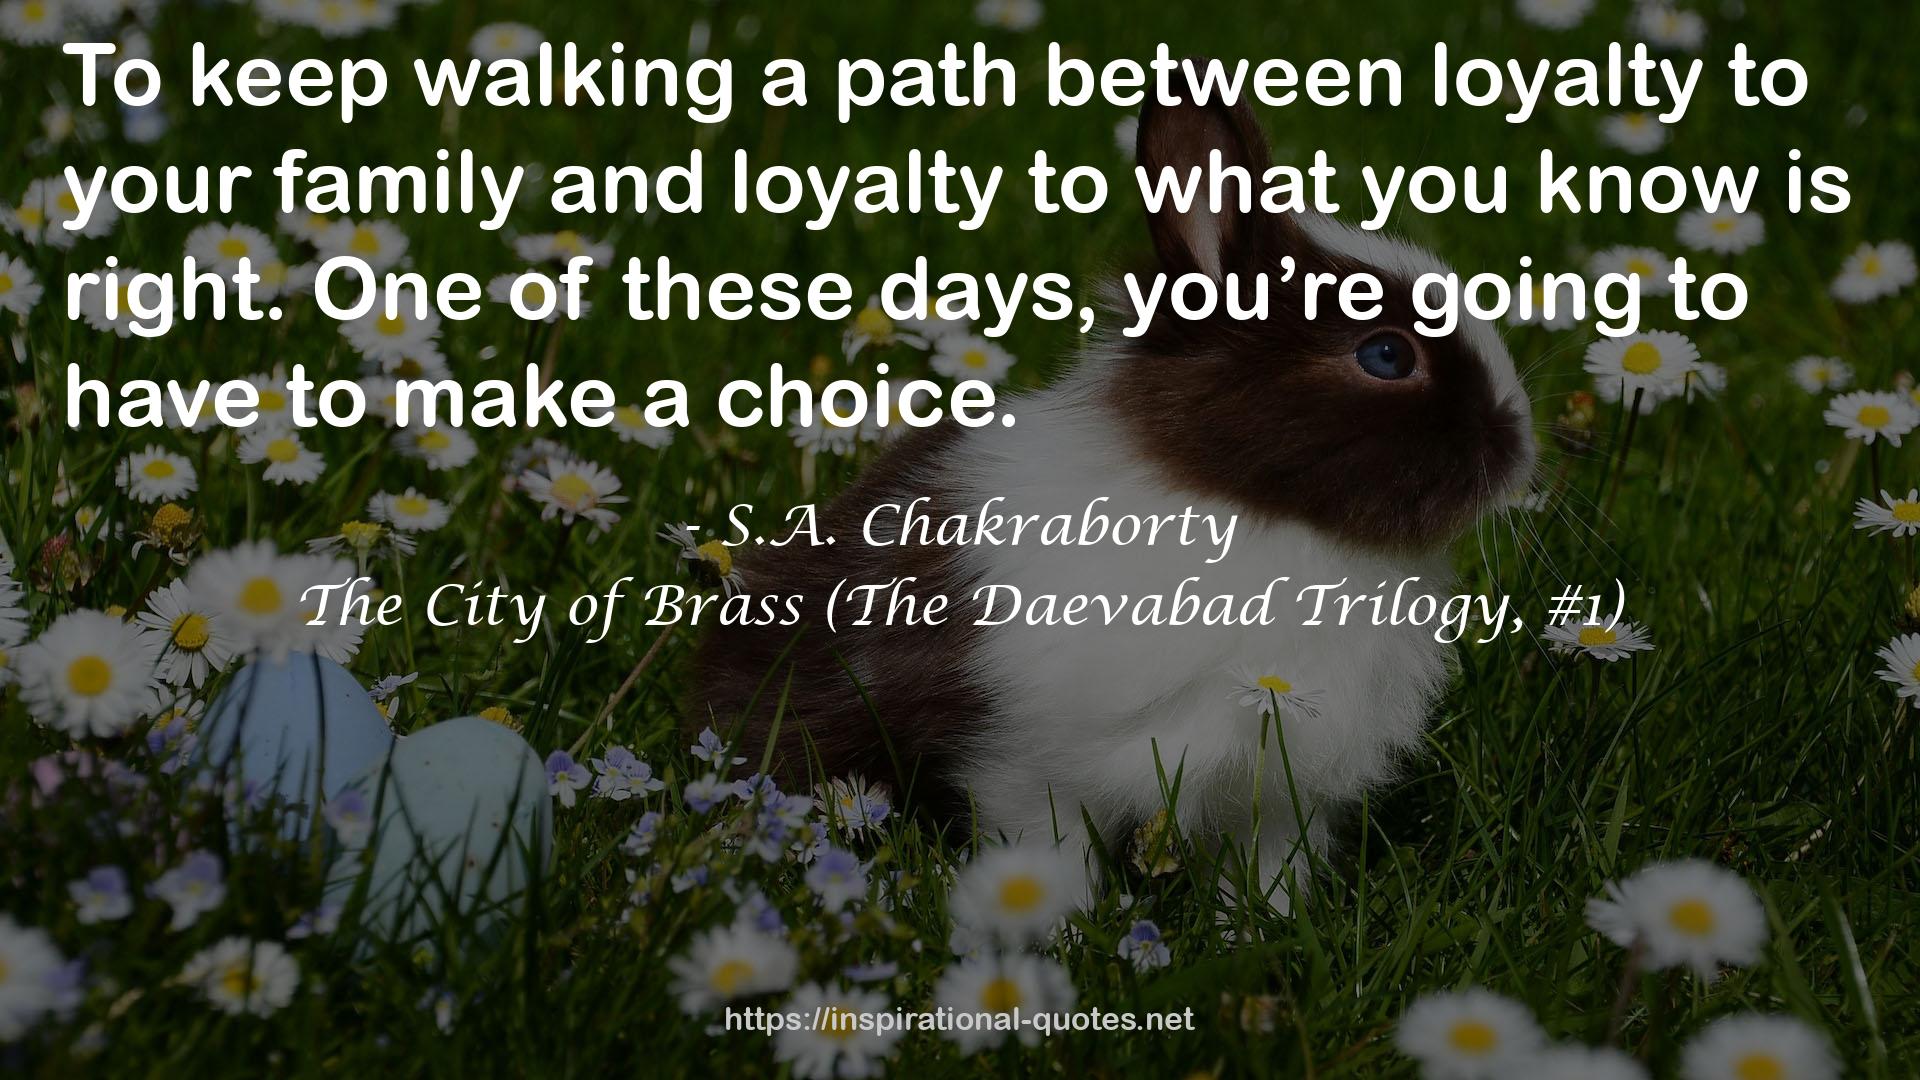 The City of Brass (The Daevabad Trilogy, #1) QUOTES